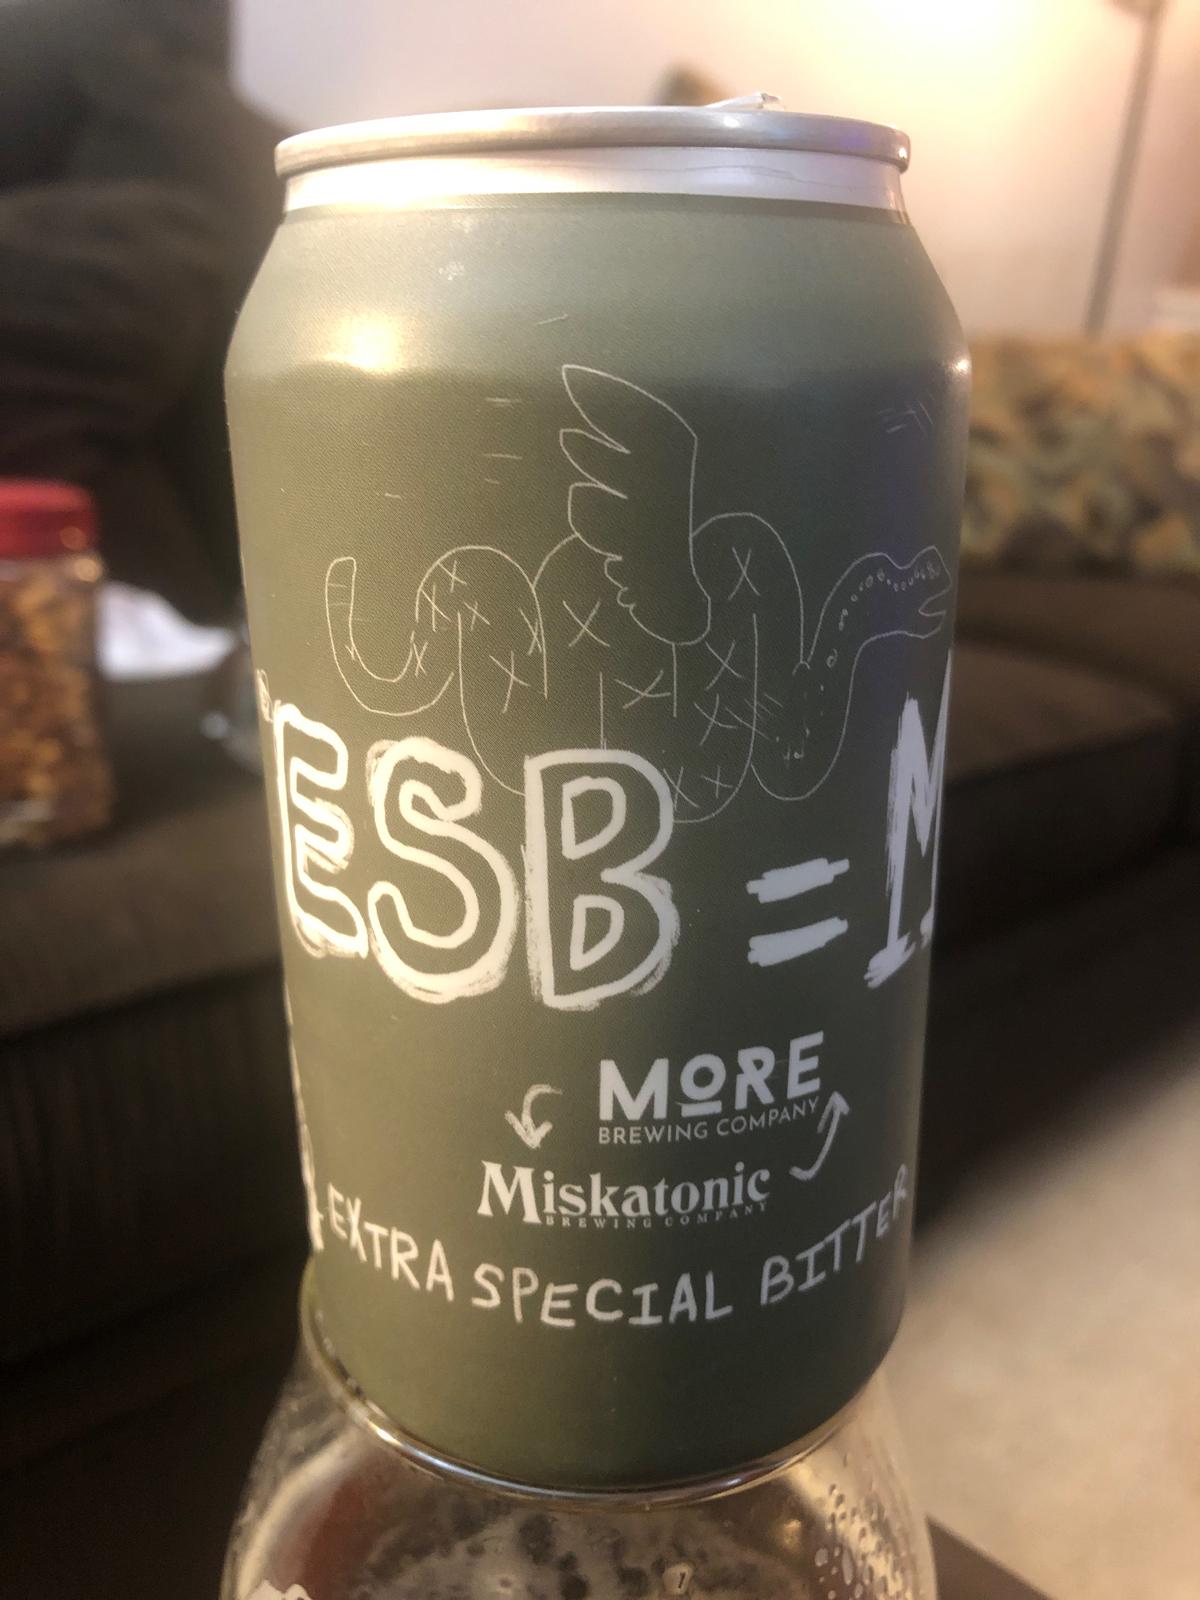 Esb=M2 (Collaboration with More Brewing Co.)